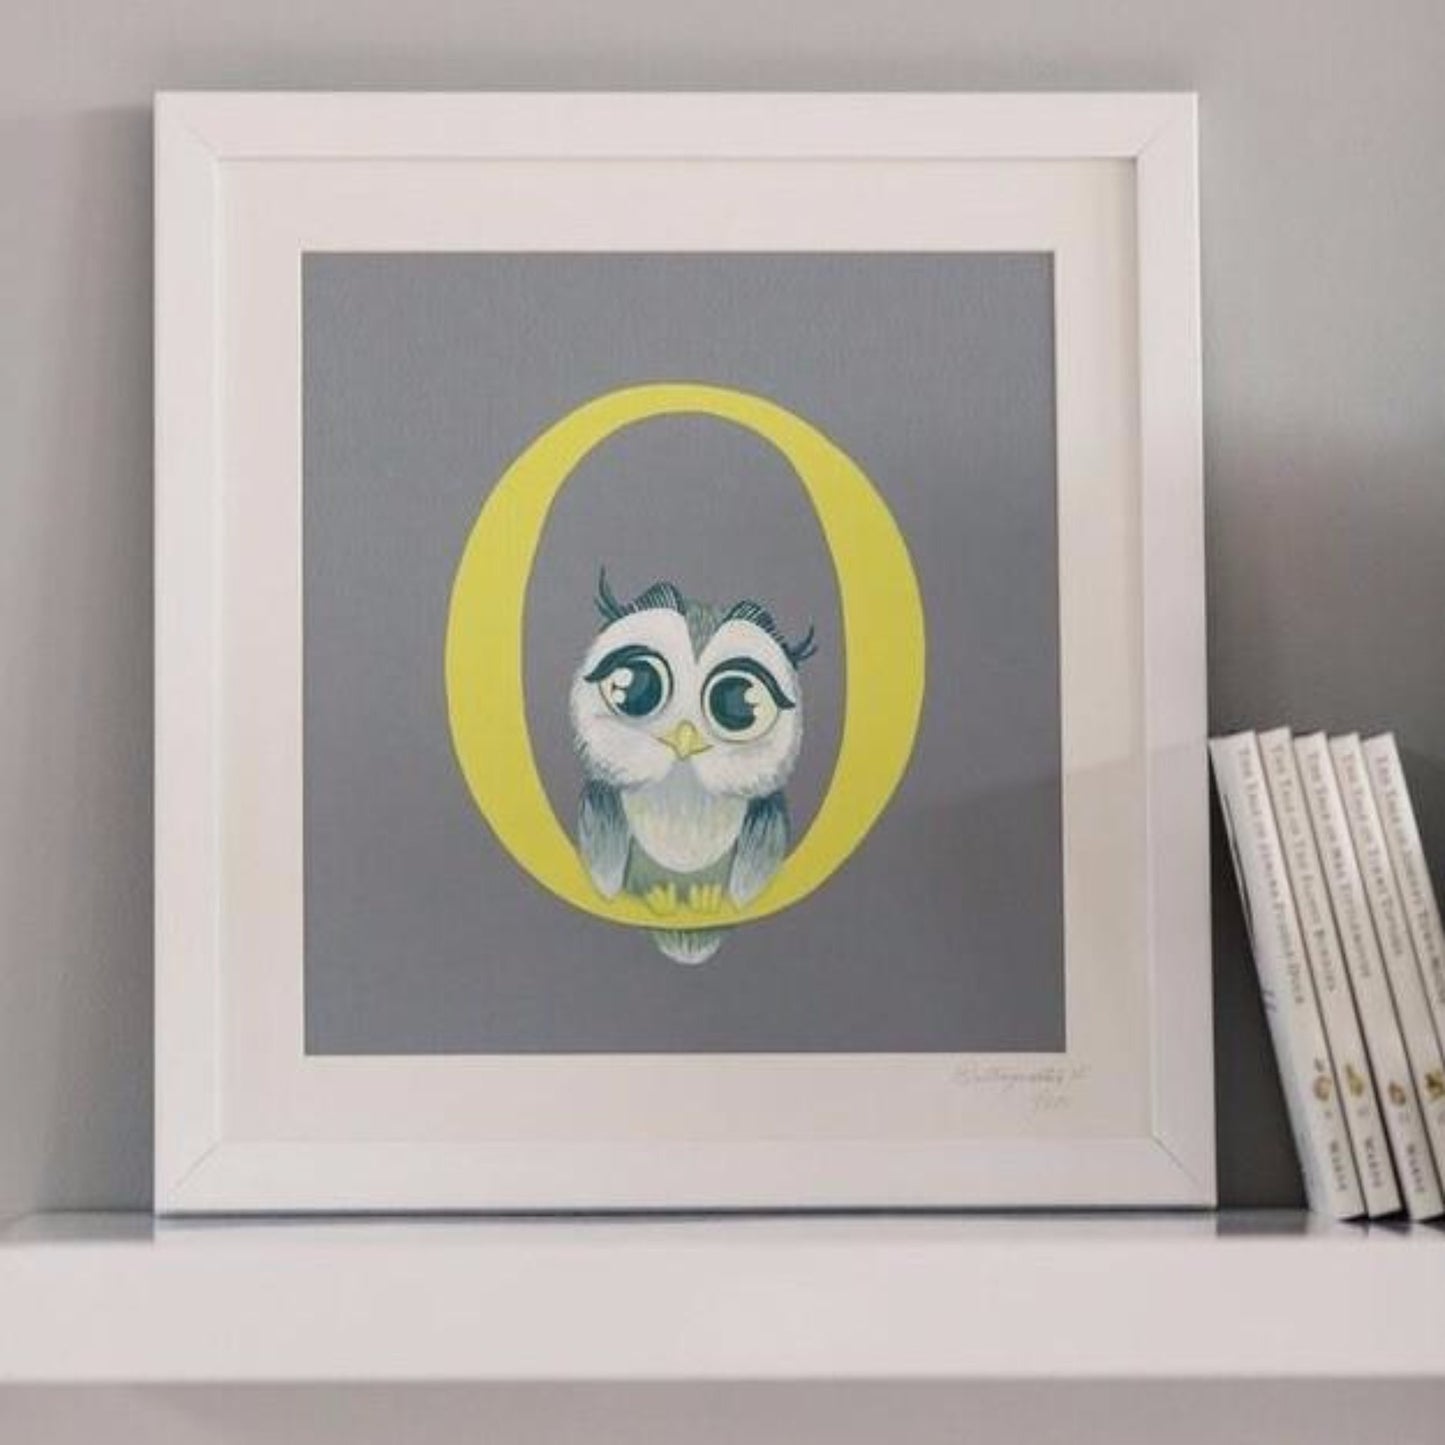 Framed O is for Owl personalised yellow, grey and white Letter print 